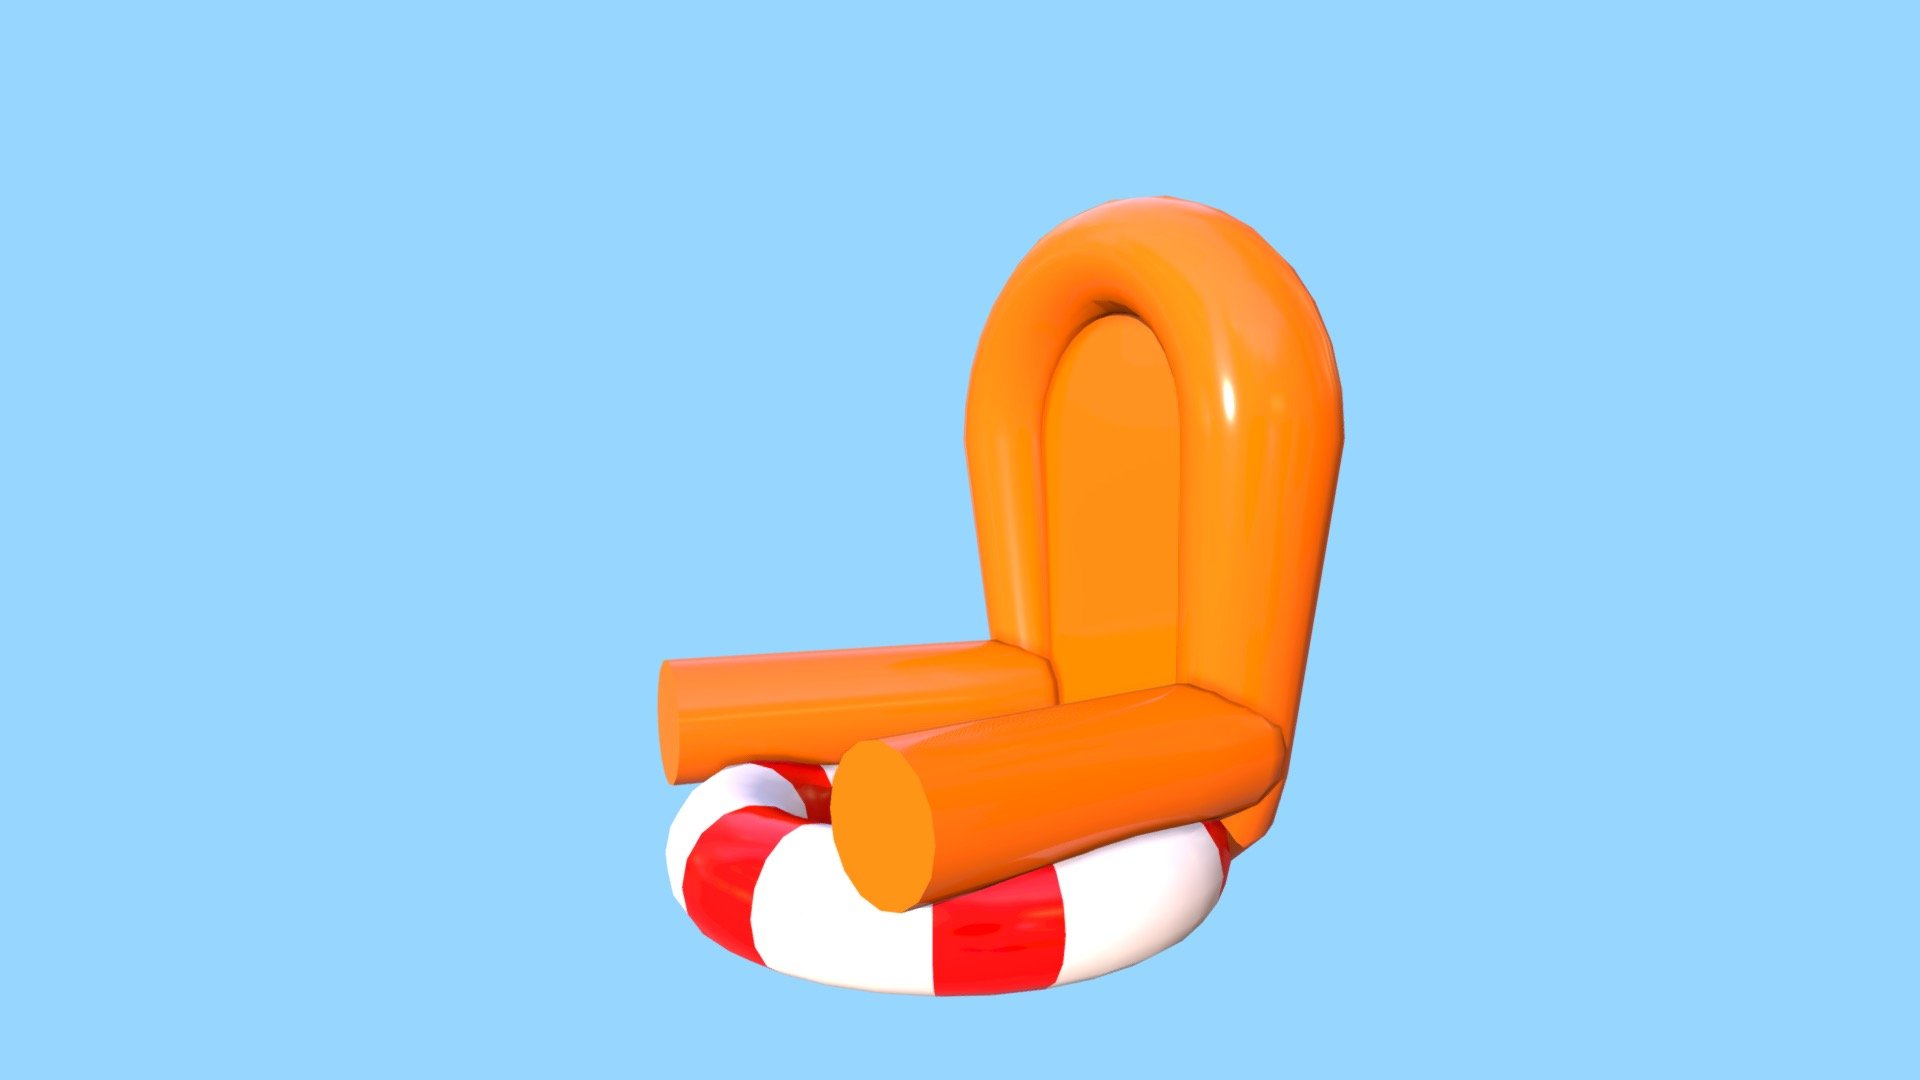 I created Spongebob's float chair that's in his living room. Created with Cinema 4D 3d model